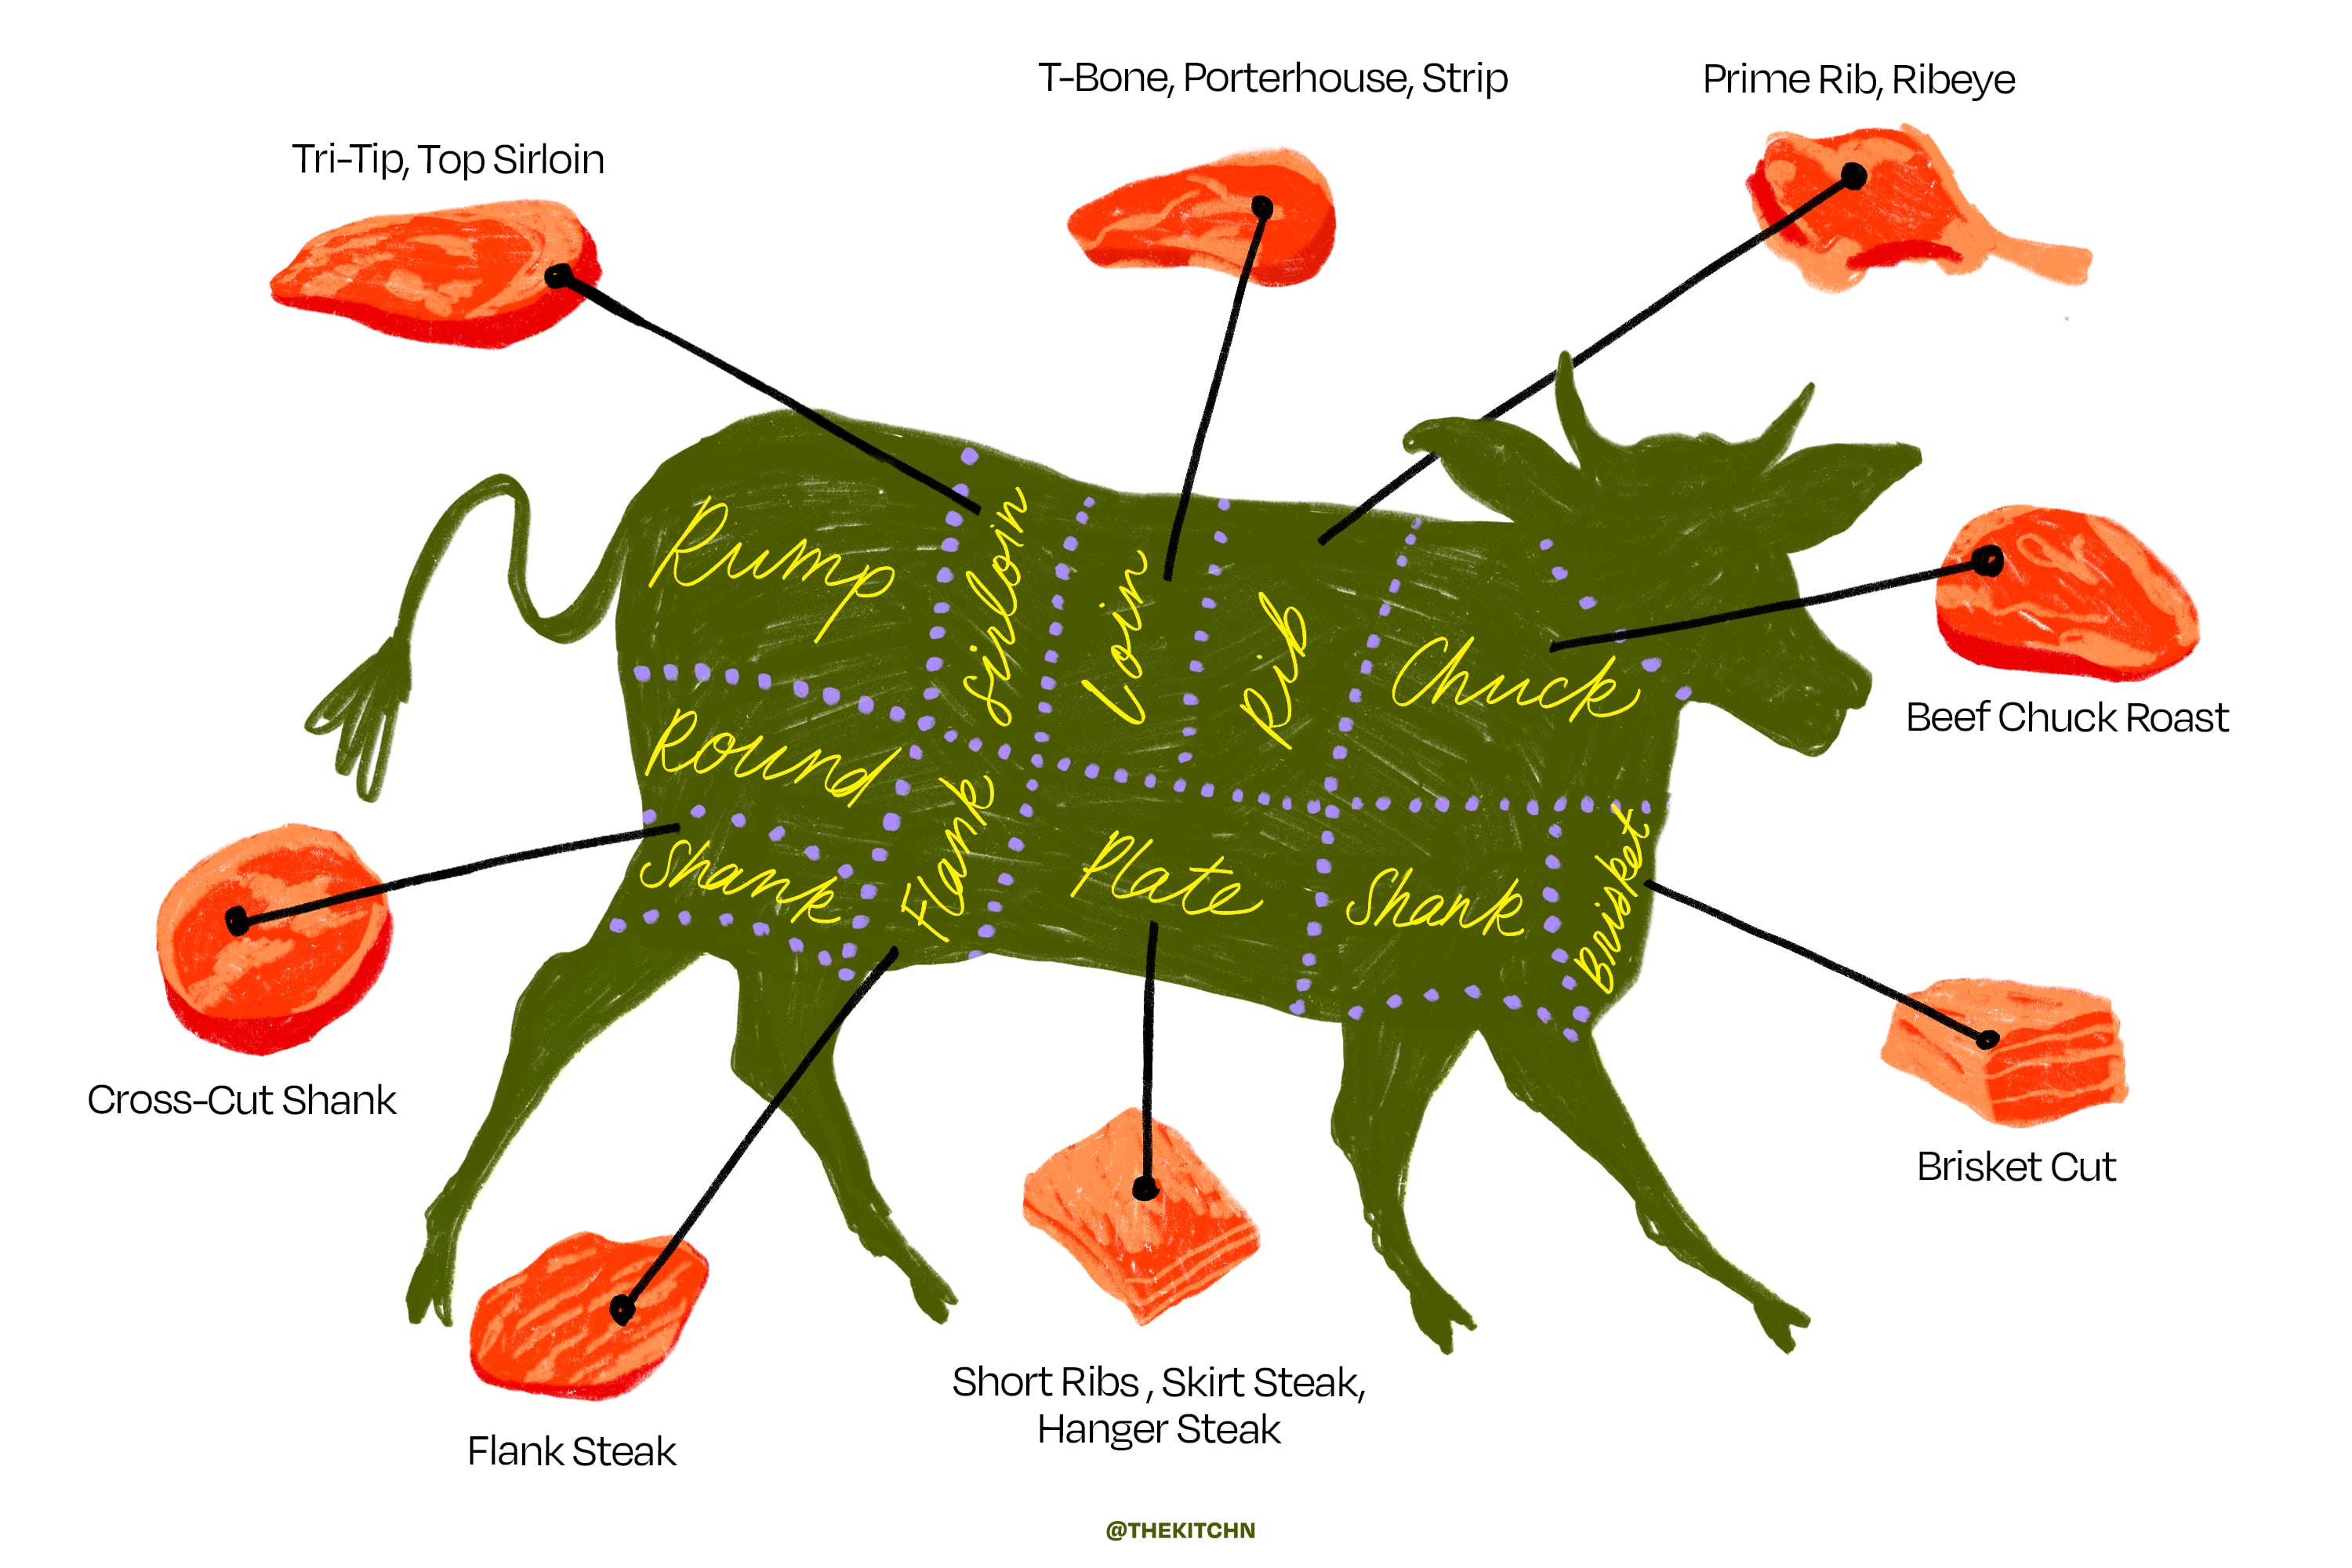 The Complete Guide to the Most Common Cuts of Beef